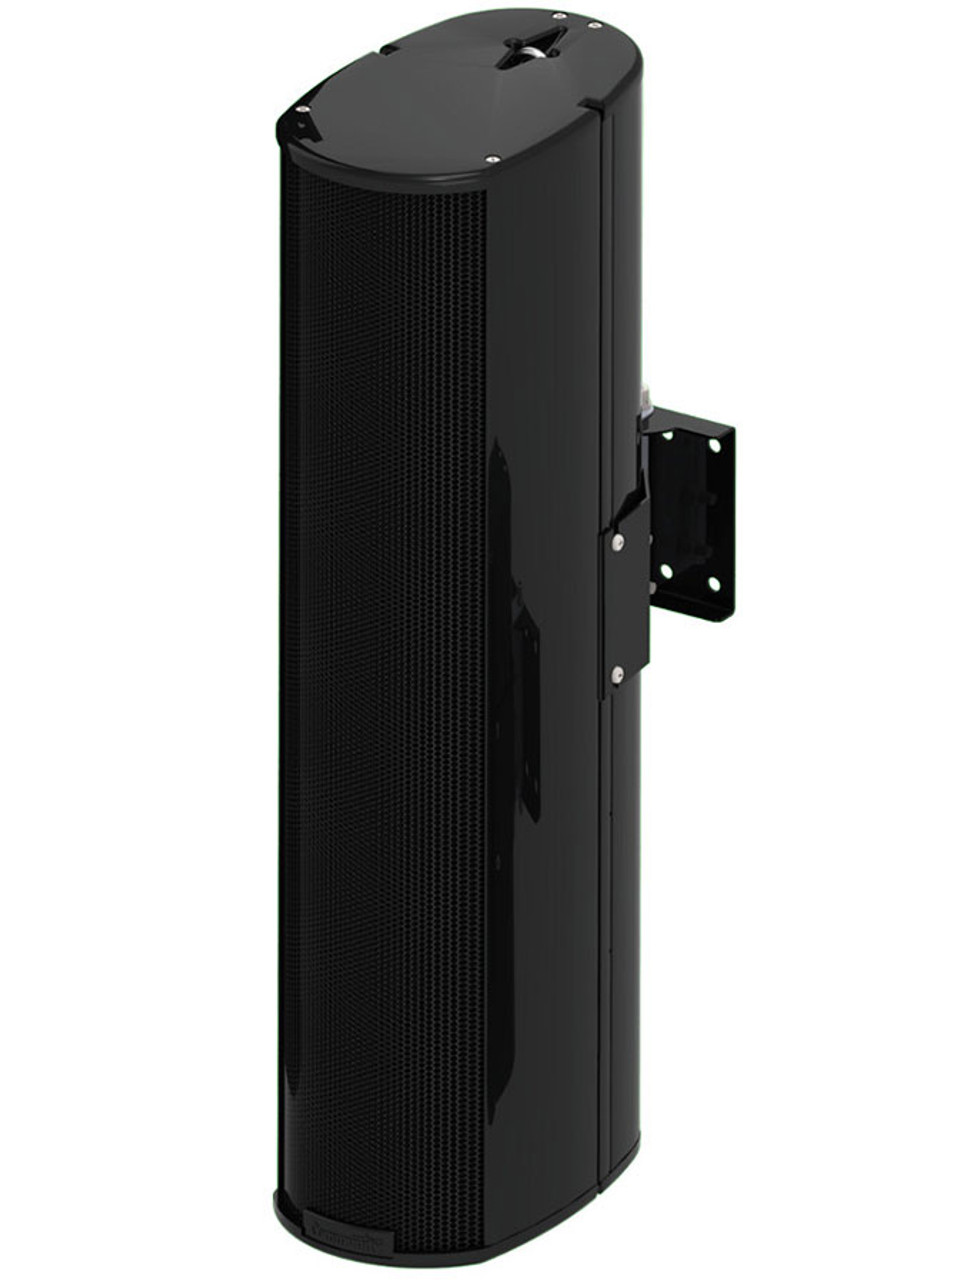 Column Cabinet Speakers, Model Name/Number: WS-6-6WT, 6W